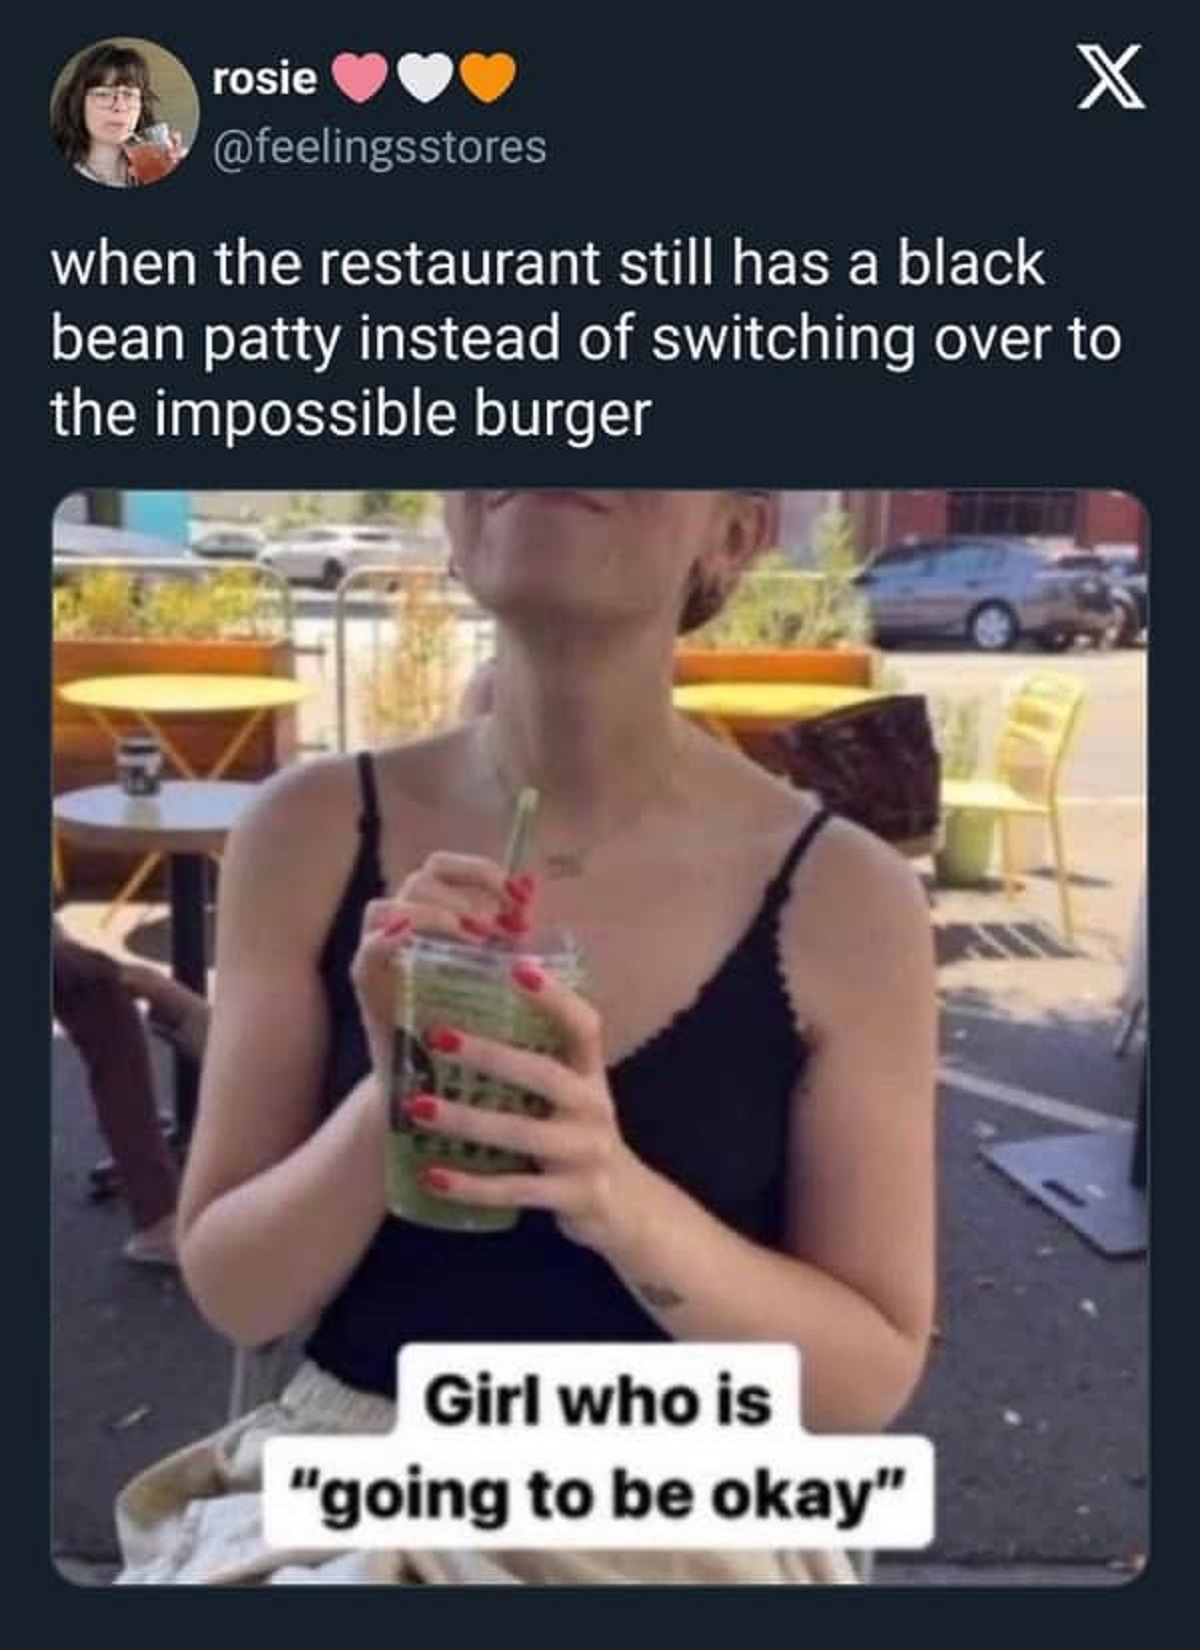 girl whos gonna be okay meme - rosie X when the restaurant still has a black bean patty instead of switching over to the impossible burger Girl who is "going to be okay"